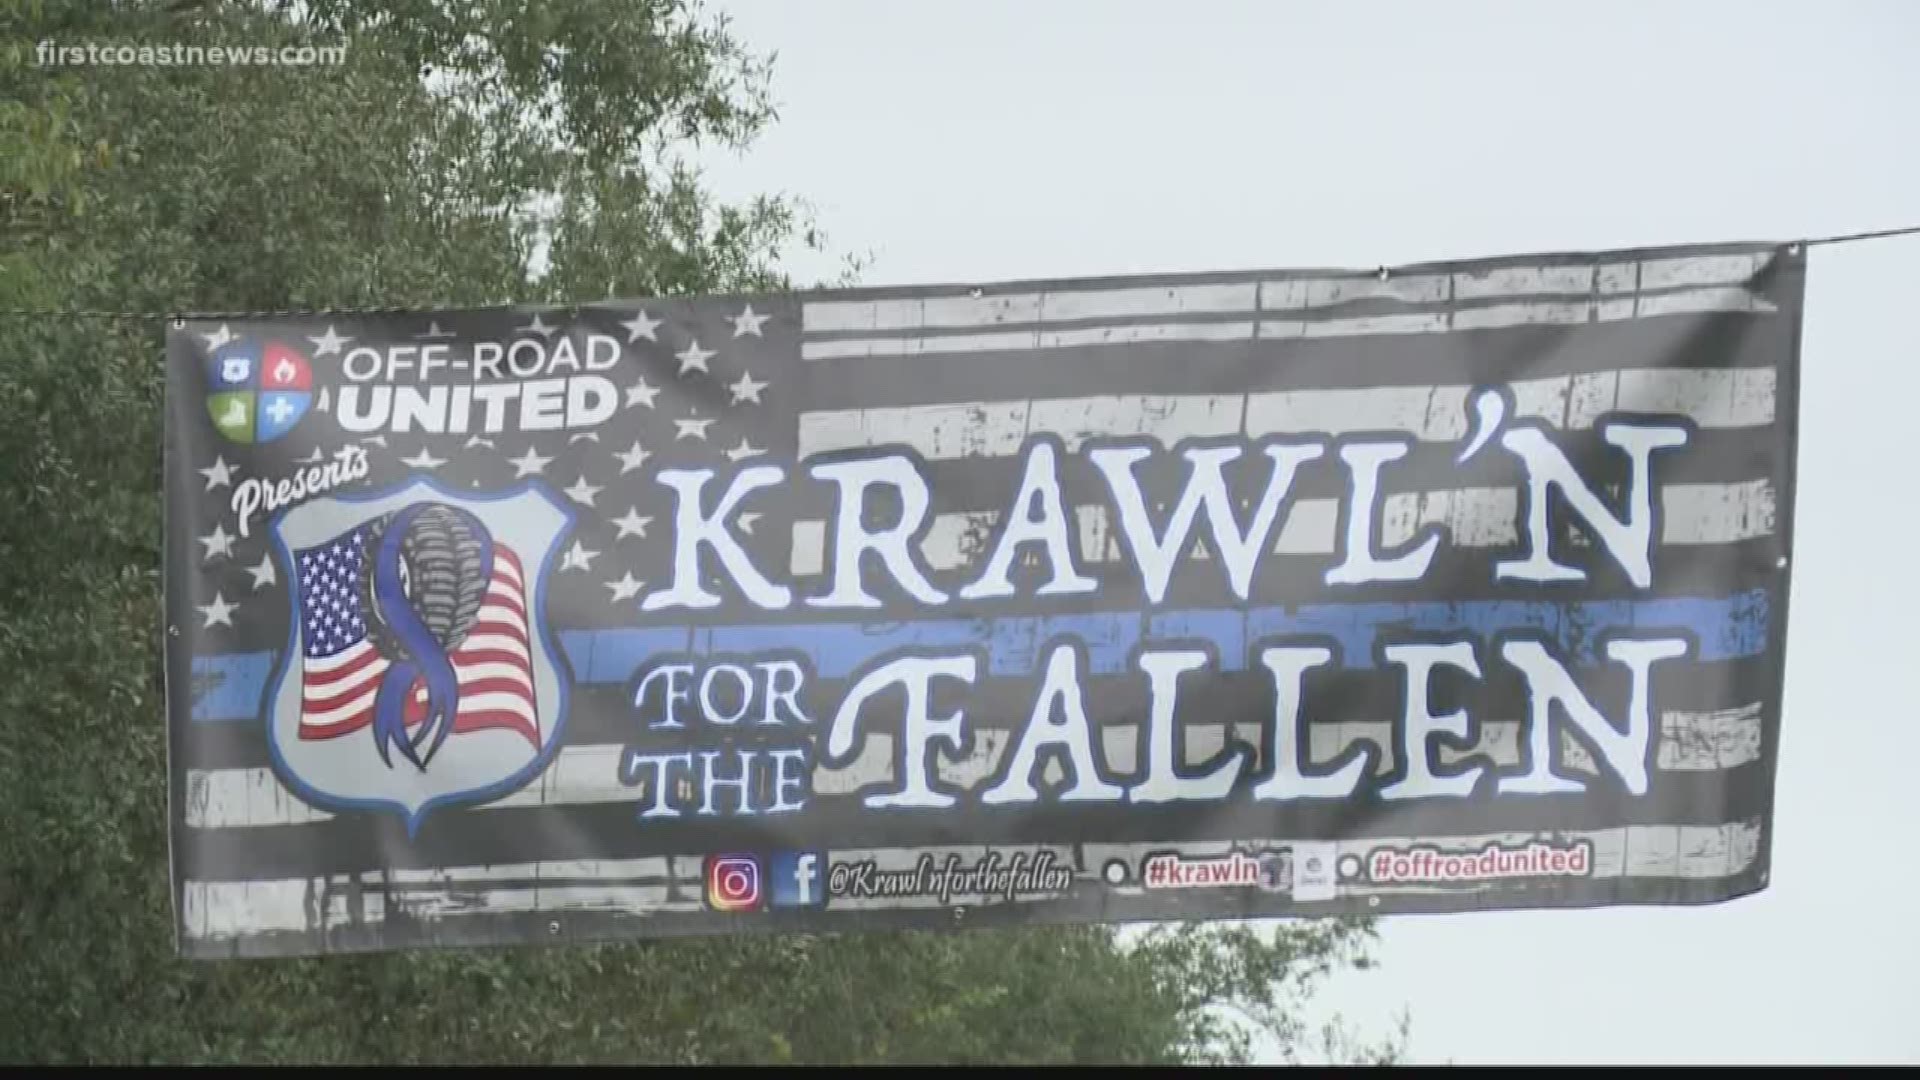 Krawl'n for the Fallen will be held at the FIRM, located at the Keystone Heights Airport. Camping starts at 4 p.m. on Friday and ends on Sunday at 4 p.m.